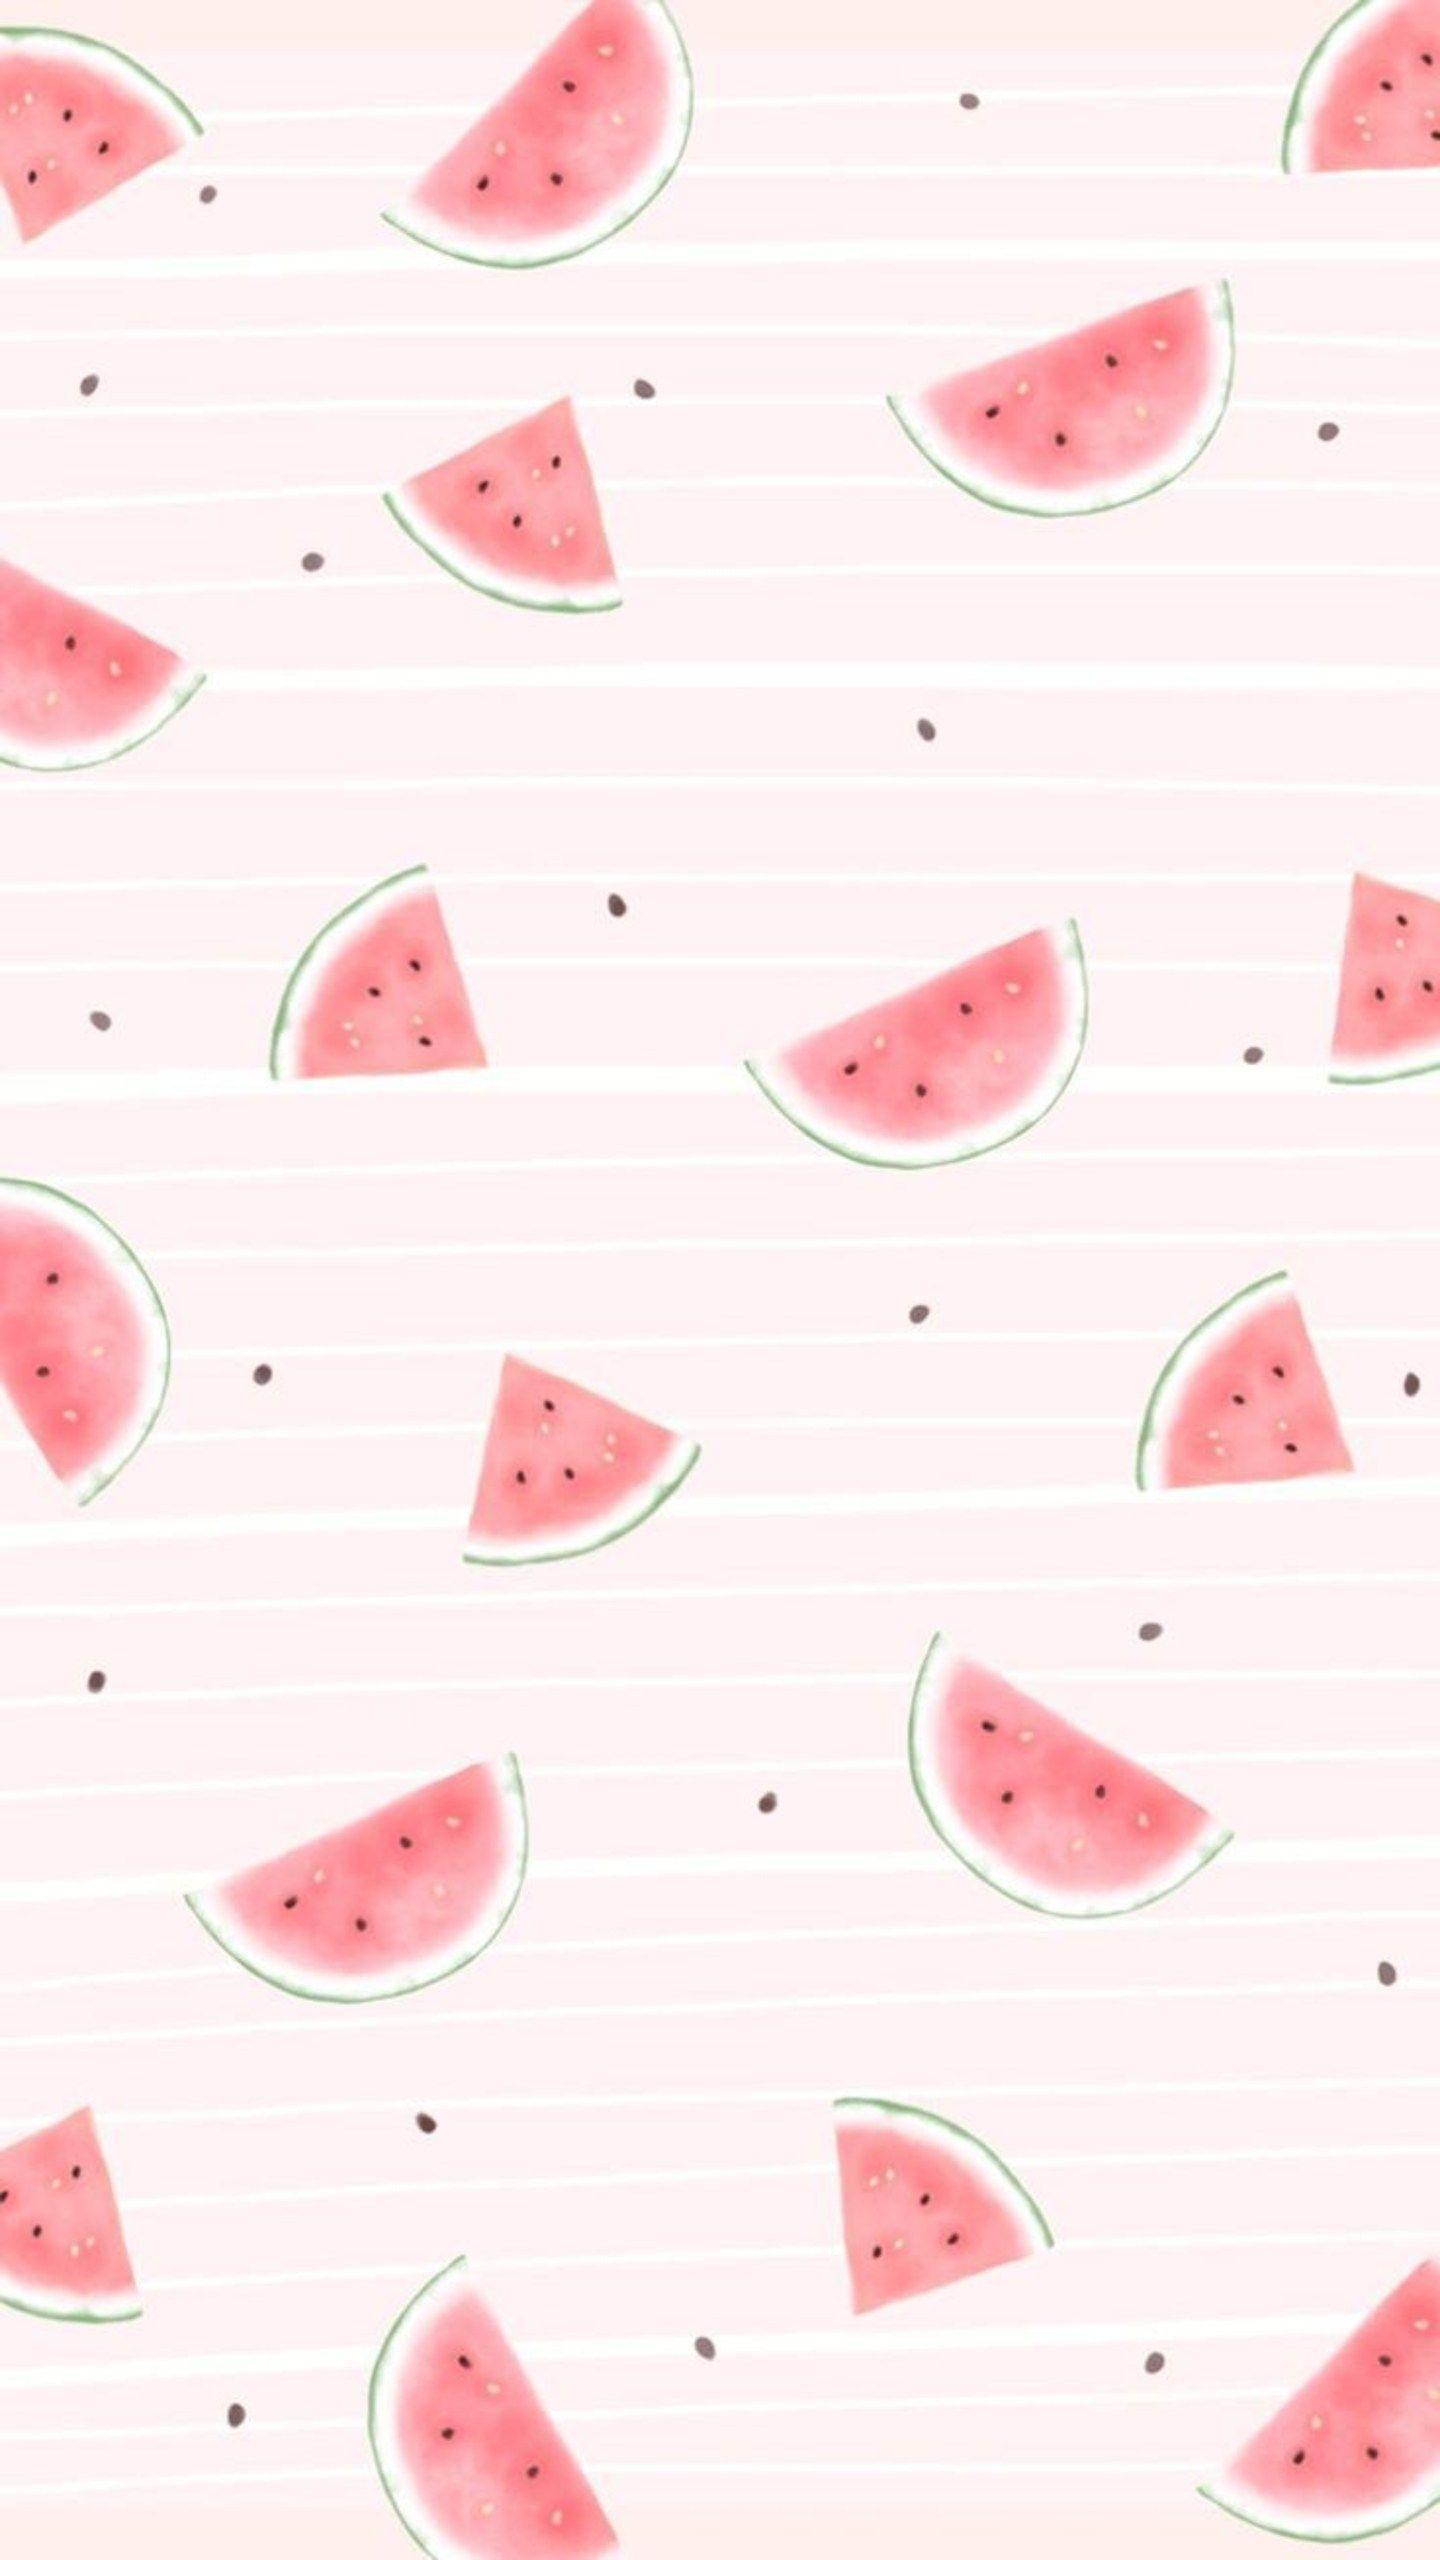 Watermelon iPhone Wallpapers - Top Free ...